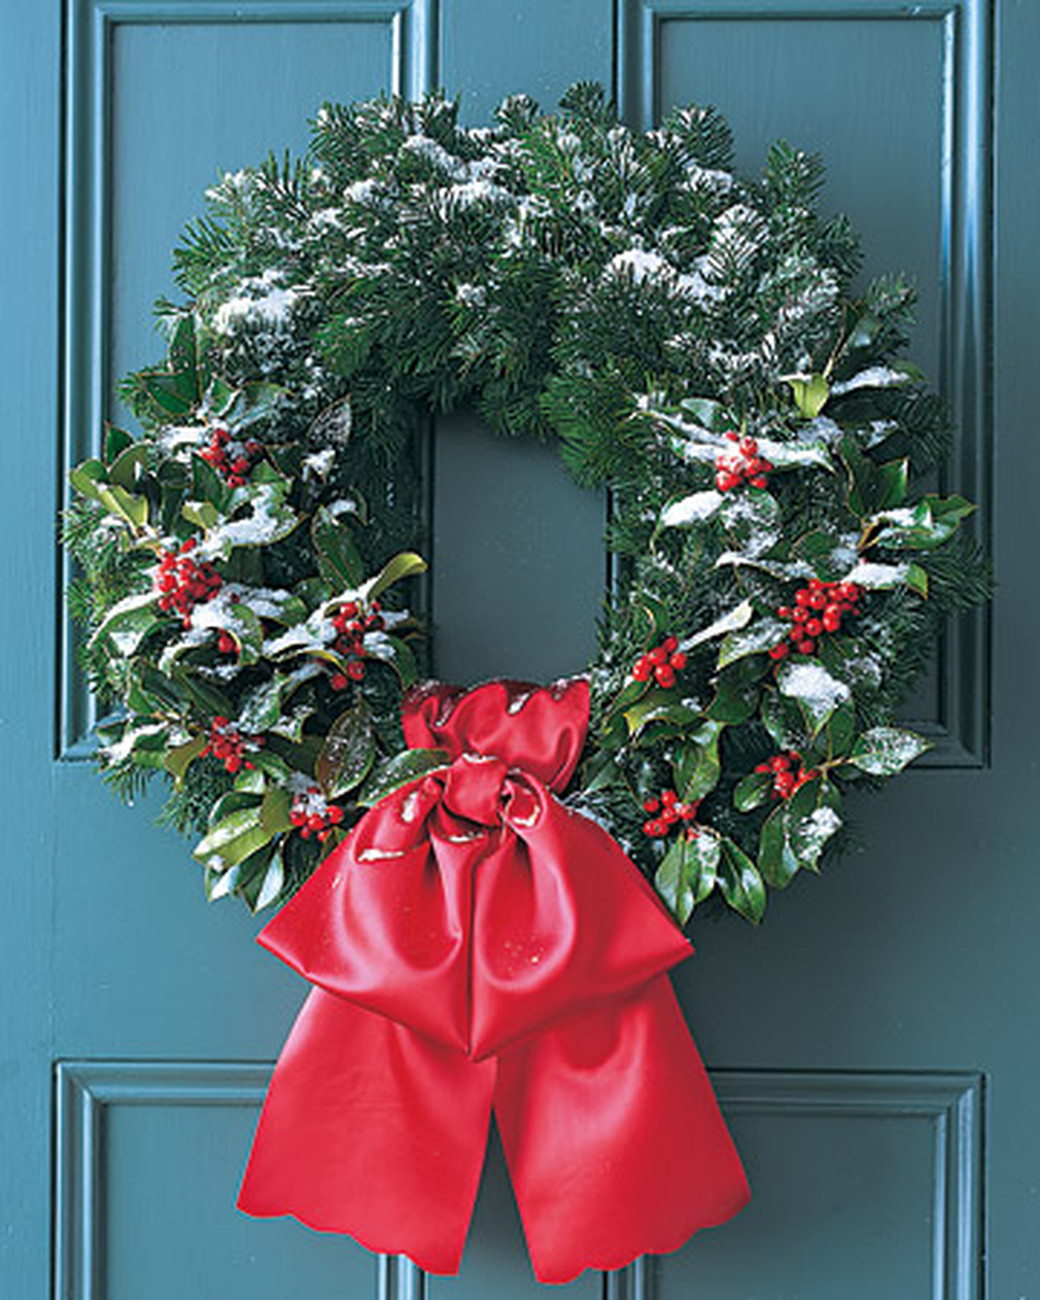 DIY Christmas Decorations Martha Stewart
 Our Favorite DIY Holiday Wreaths for your Front Door